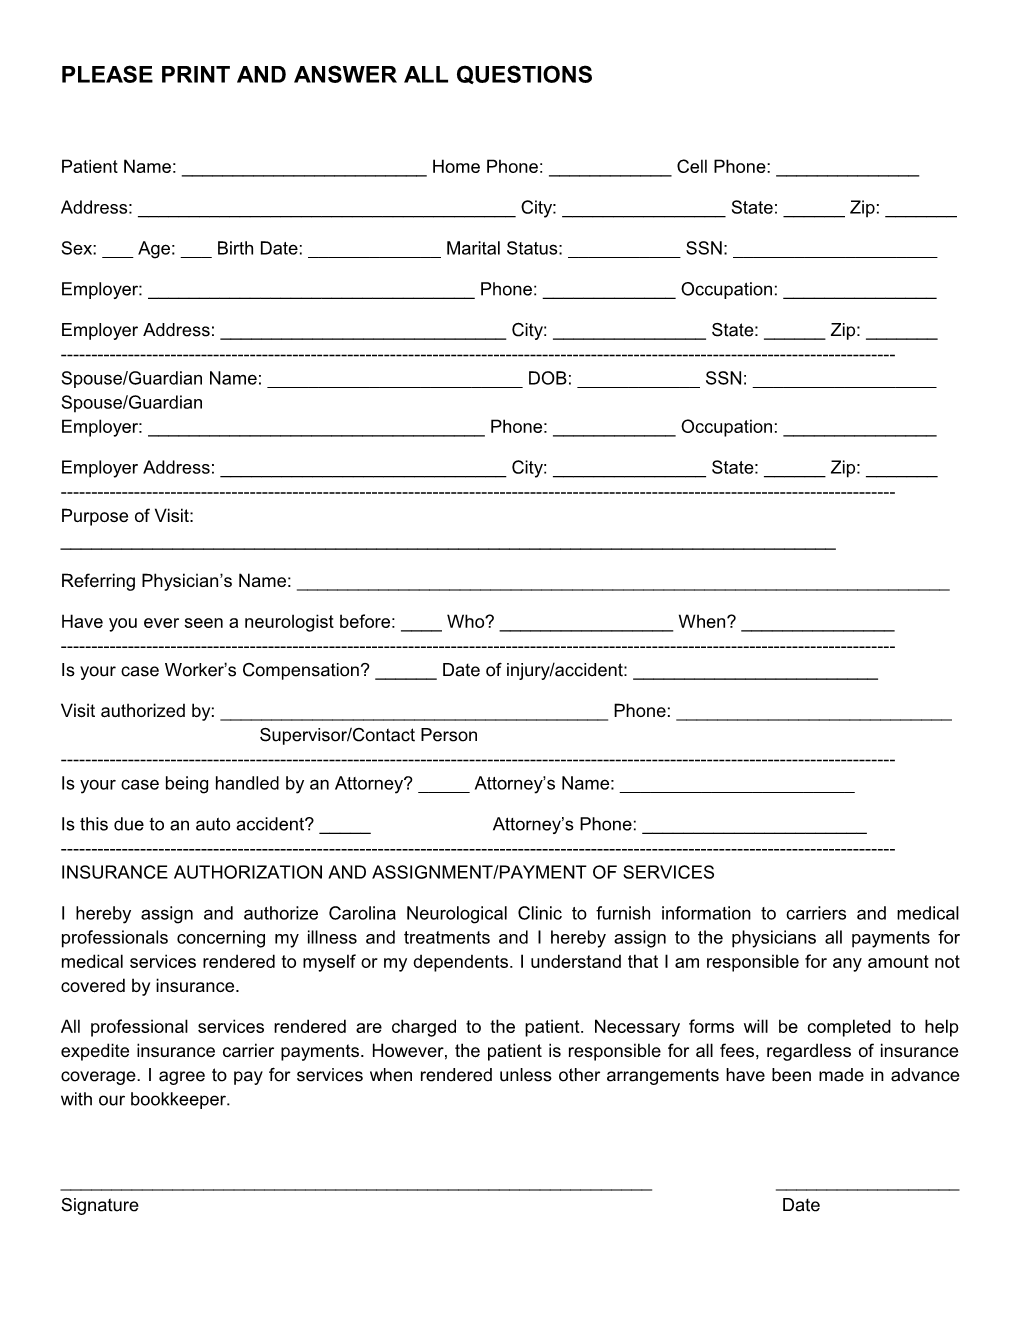 Please Print and Answer All Questions